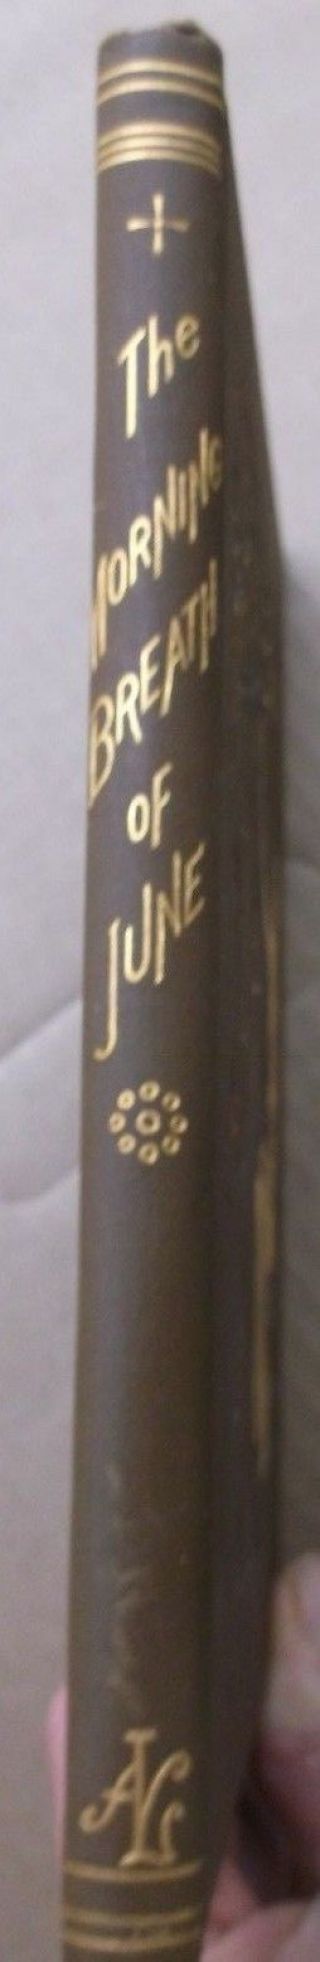 1884 POETRY book illustrated A Newman Lockwood near fine cond 2